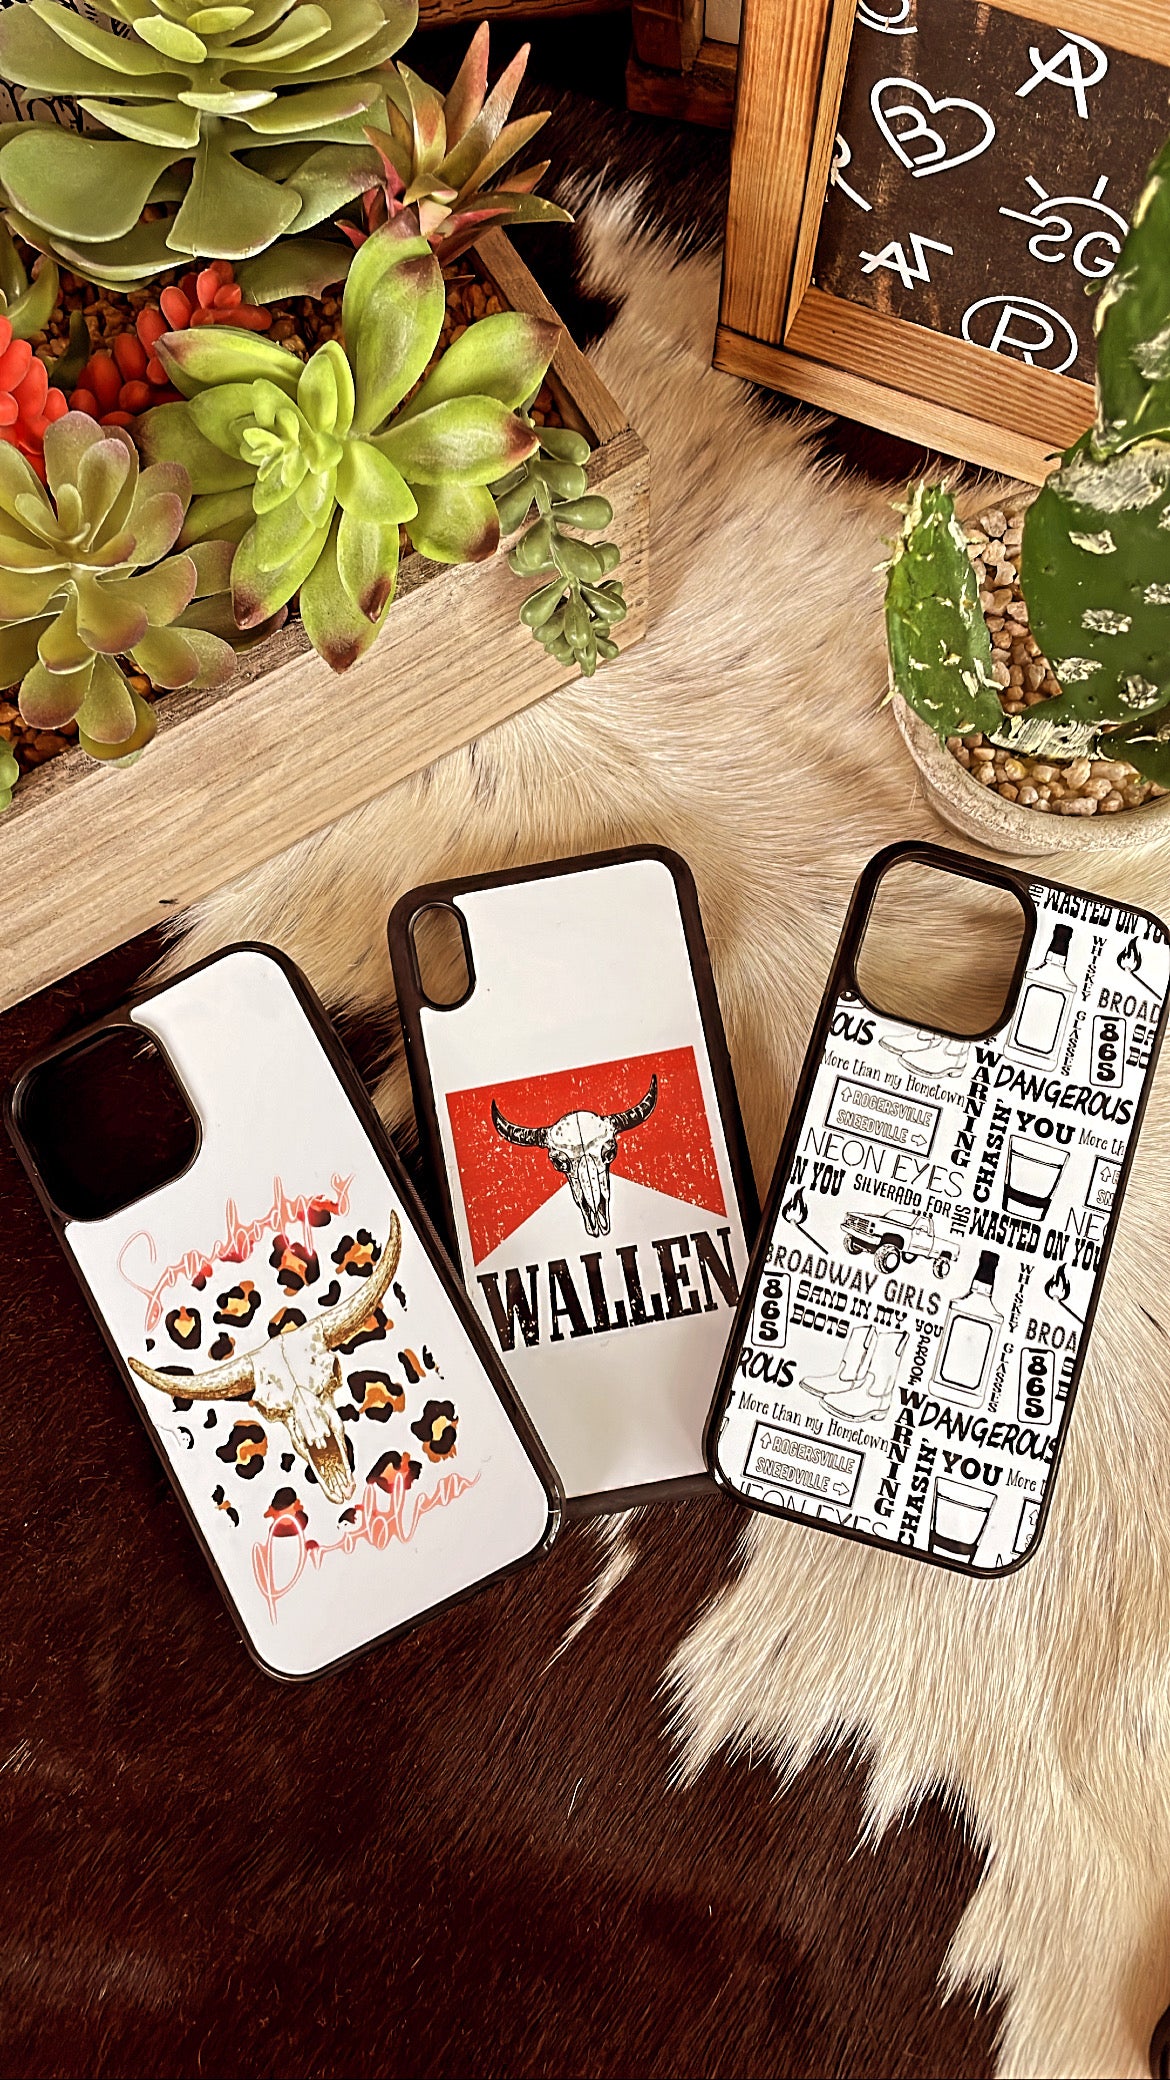 The Wallen Phone Case Collection